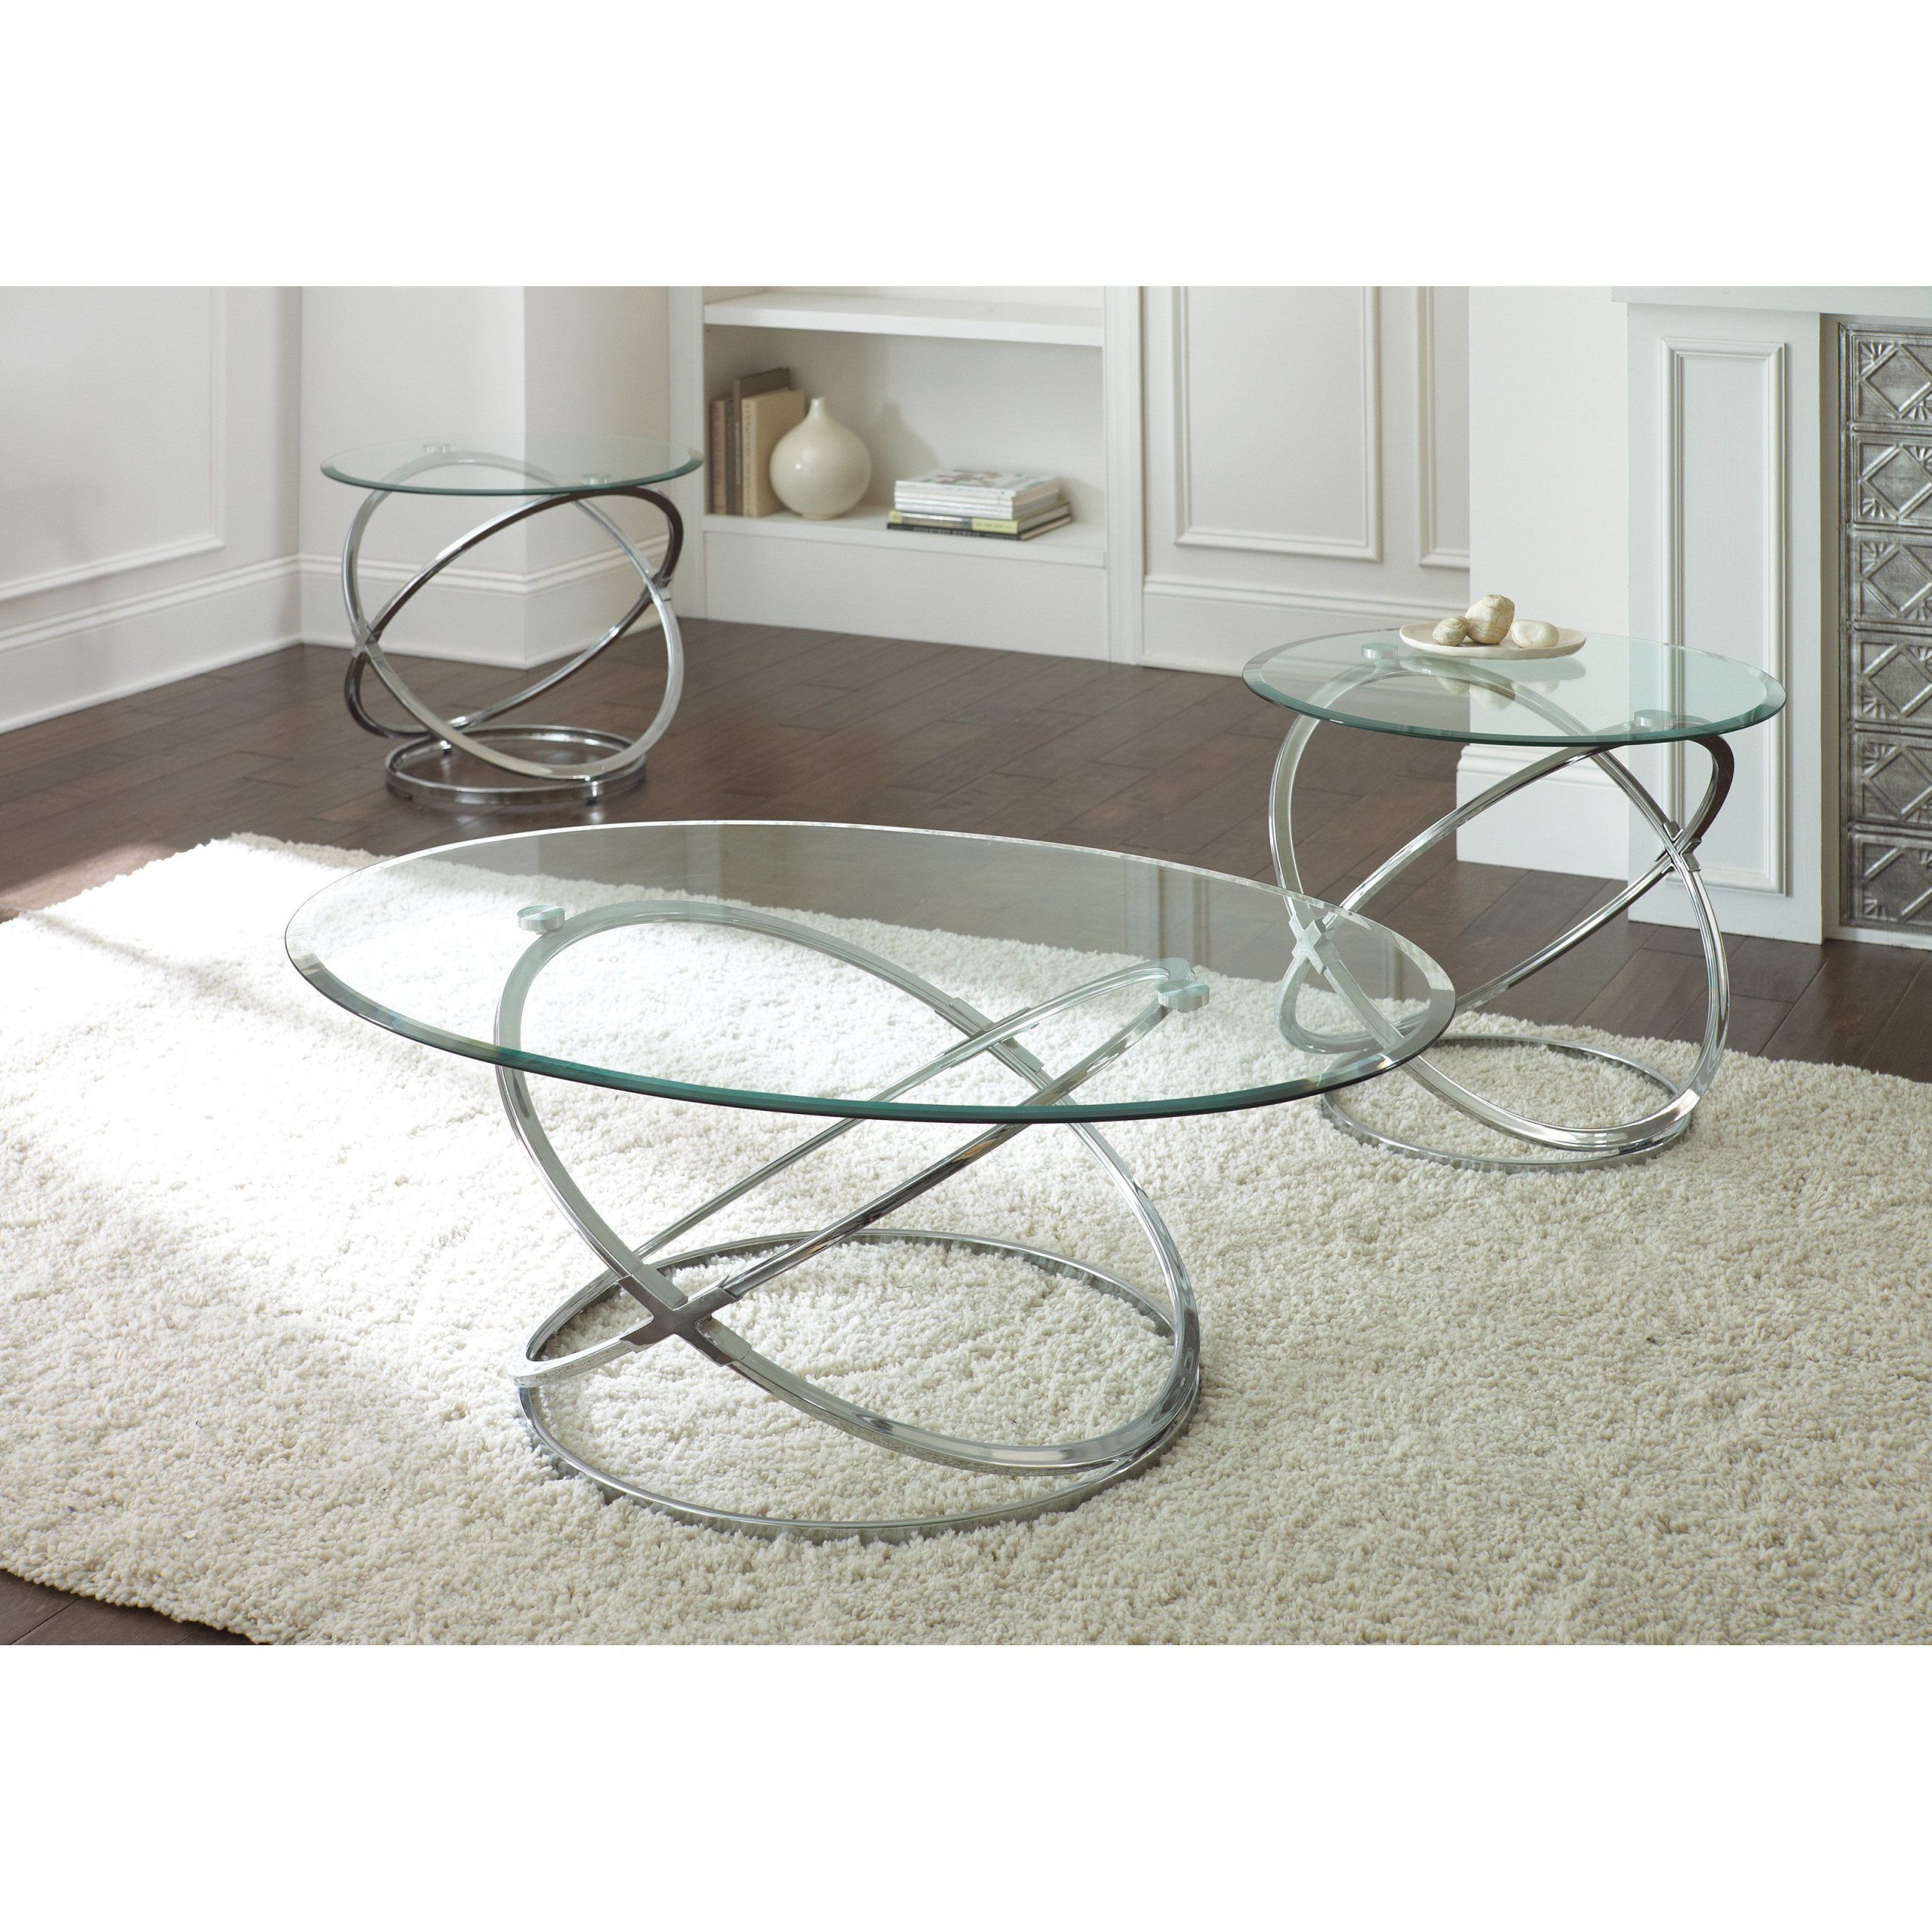 2020 Metallic Gold Modern Cocktail Tables For Steve Silver Orion Oval Chrome And Glass Coffee Table Set (View 10 of 20)